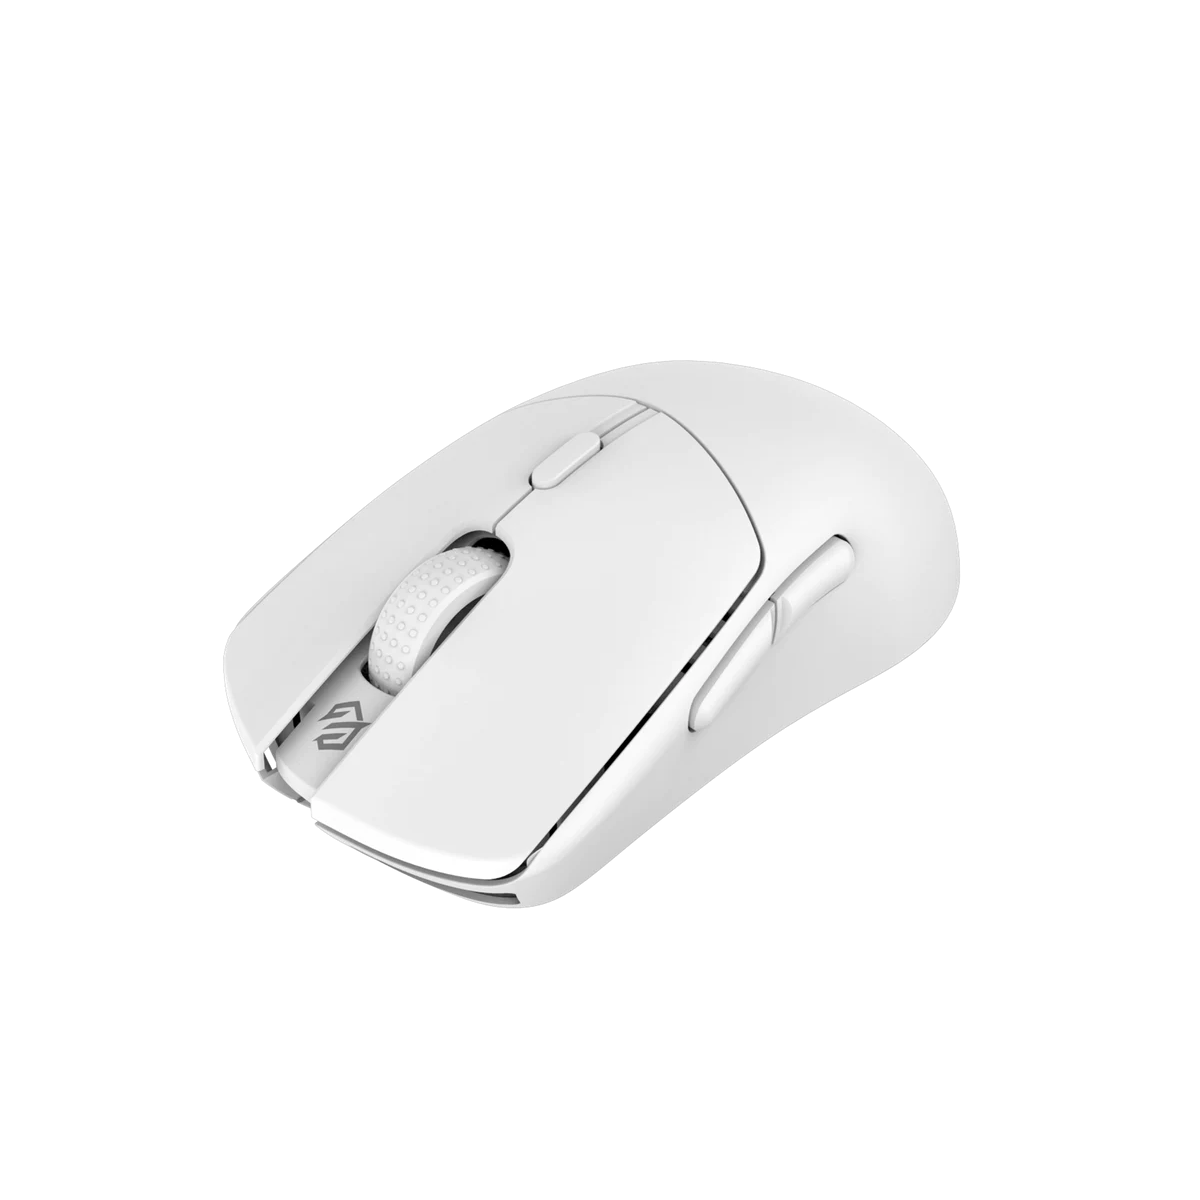 HT Wireless Gaming Mouse just for Reviewer and repair